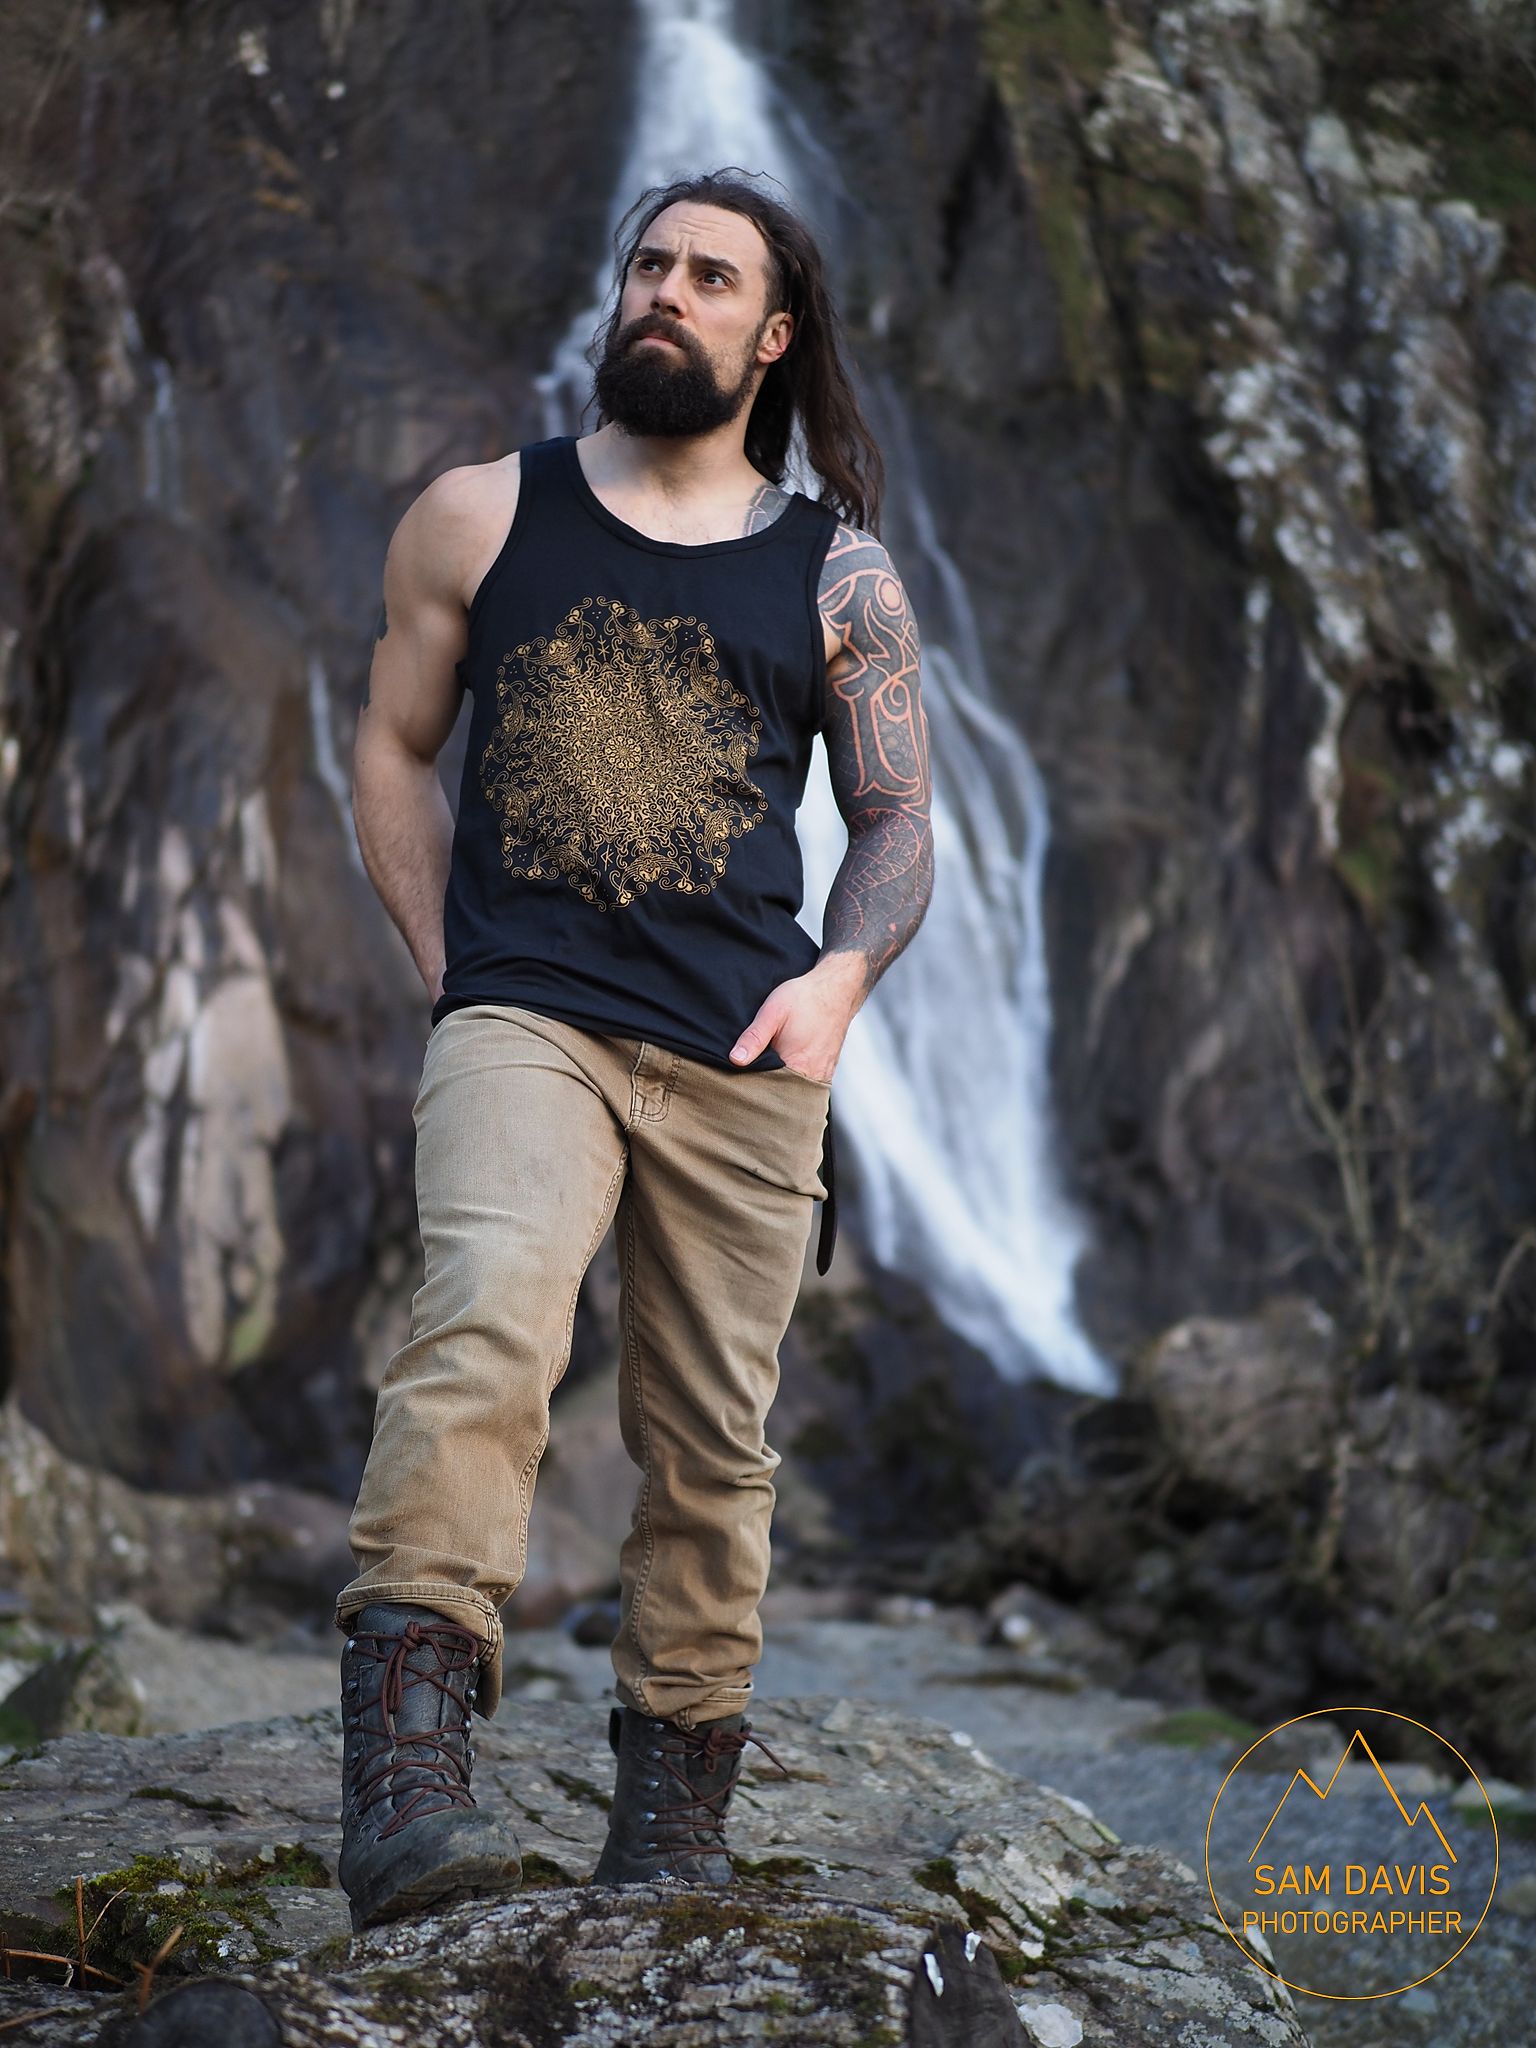 Ed Gamester modelling for Northern Fire at Aber Falls, North Wales, UK. https://www.northernfiredesigns.com/ , www.samsphotogallery.comsFashion Photoshoot. Sam Davis Photographer. Photographer for hire Wales.